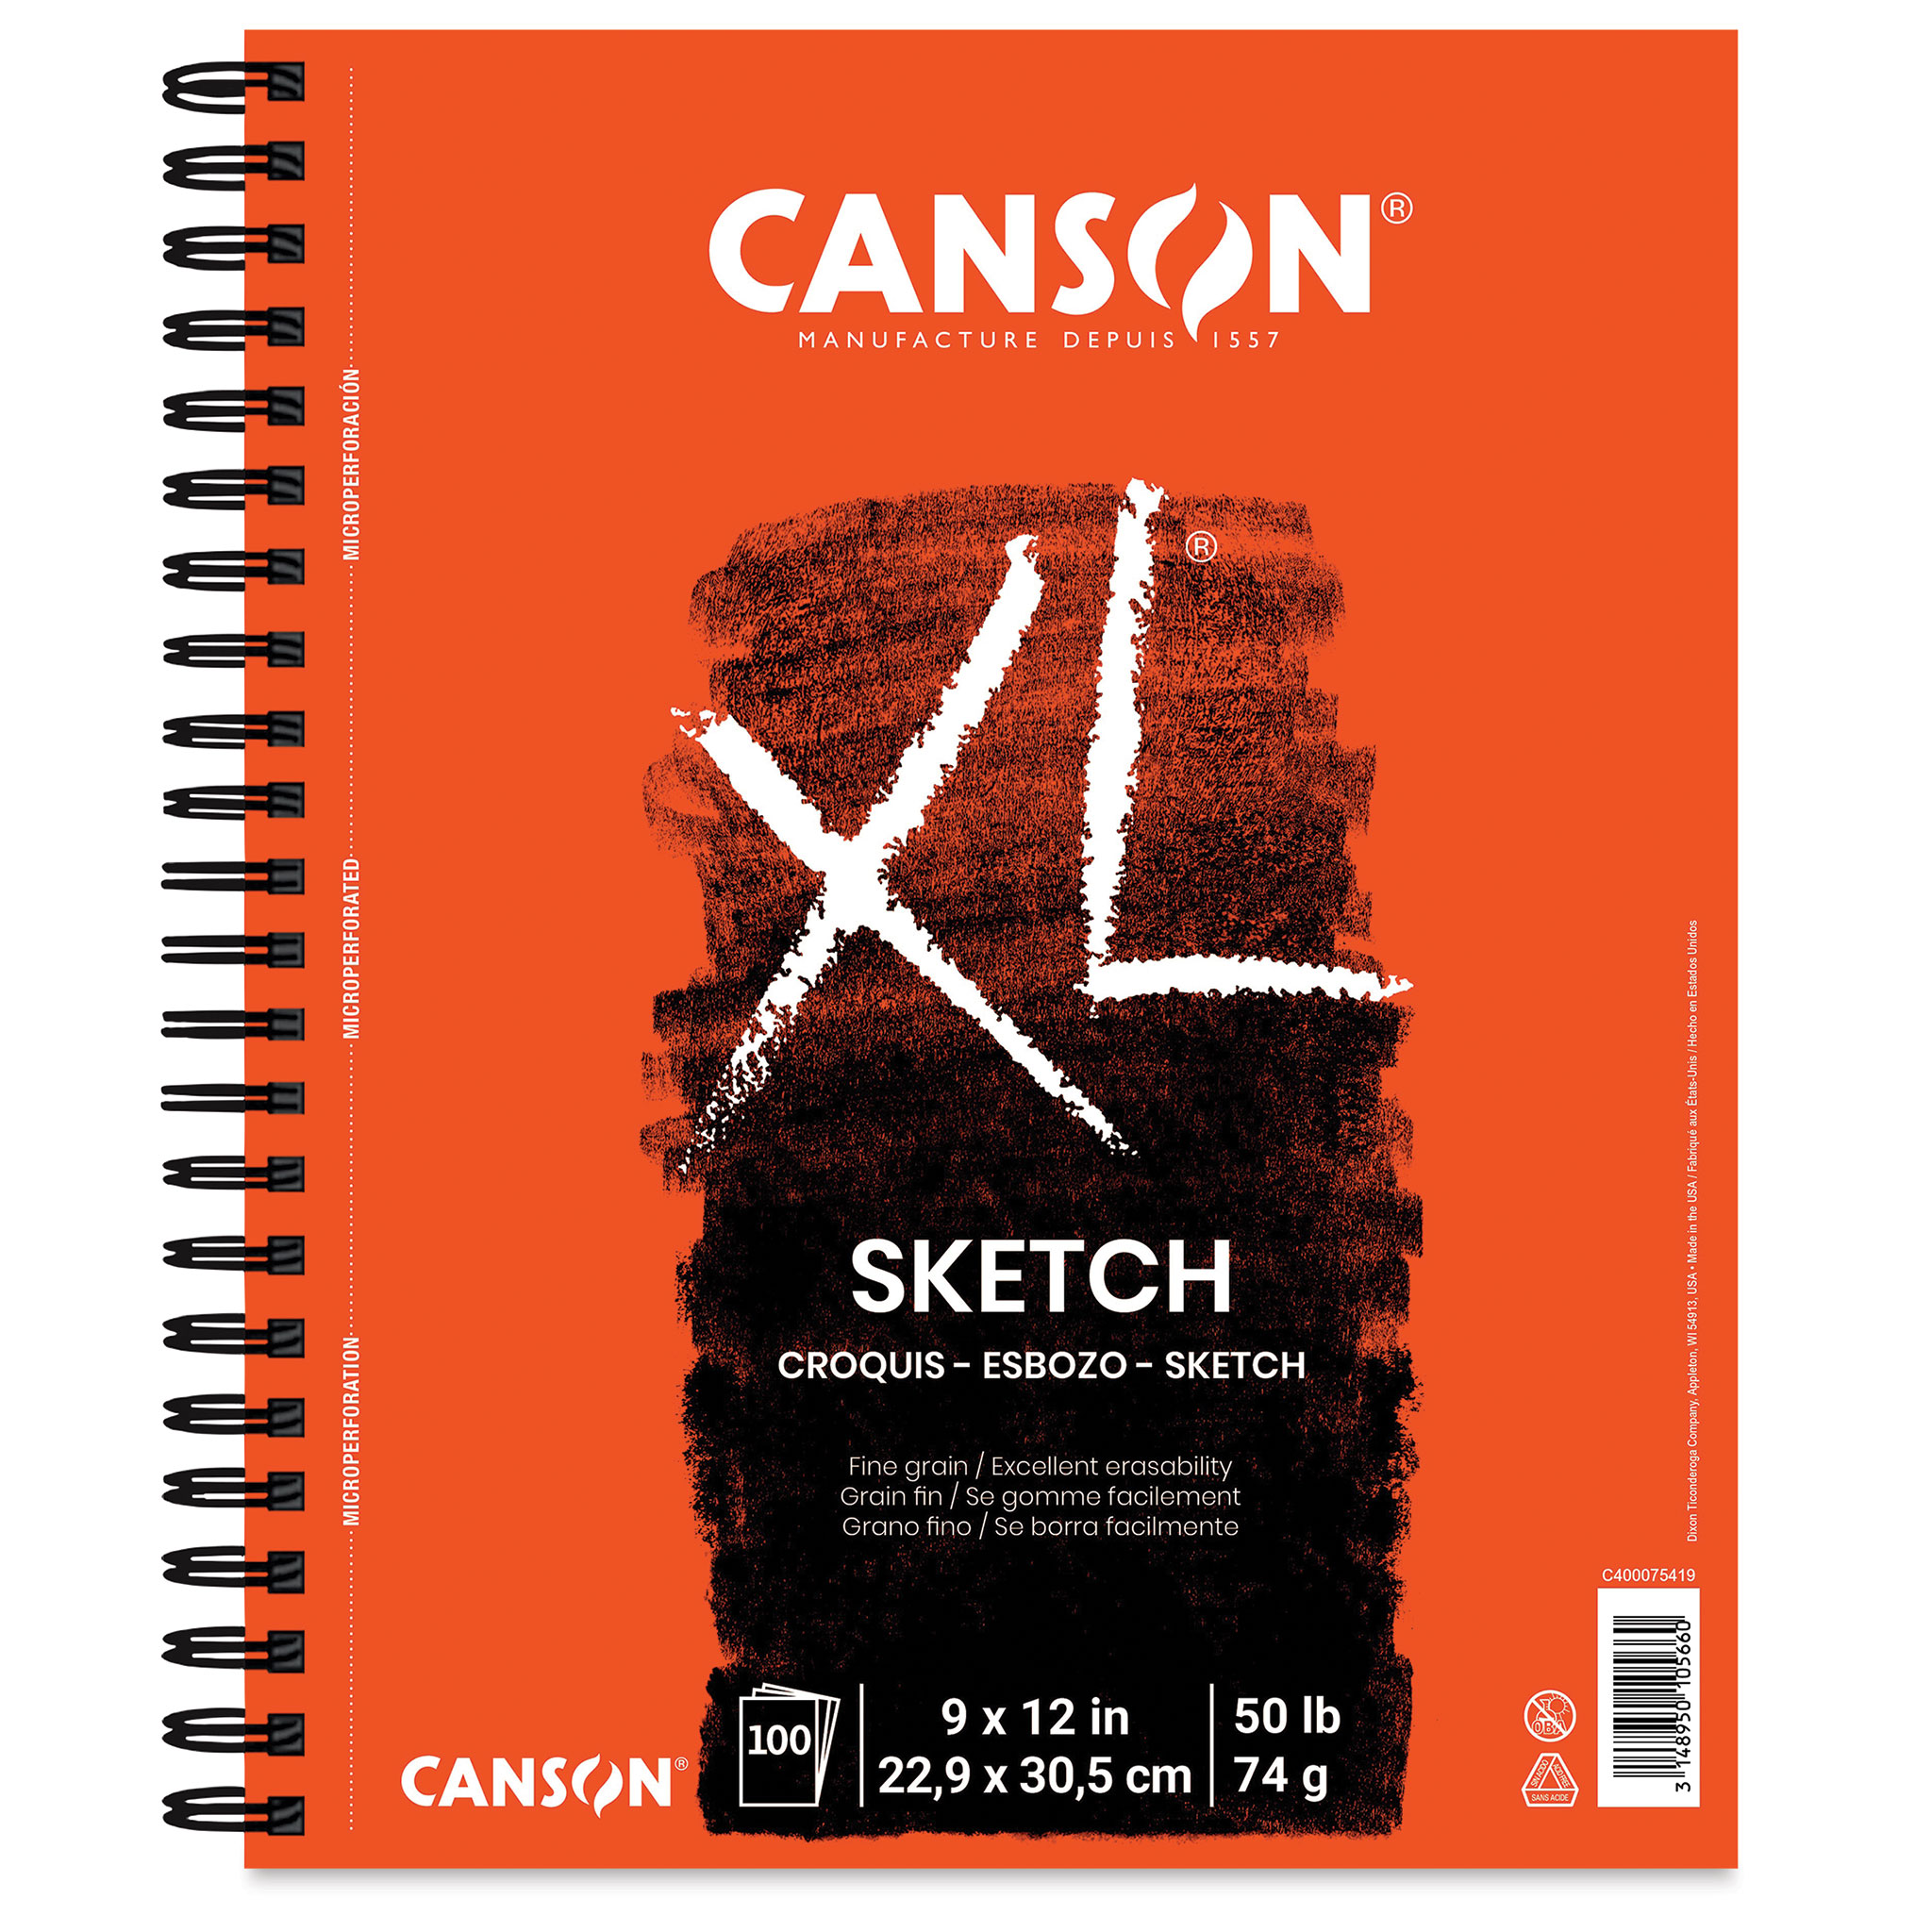 Canson XL Sketch Pad 18x24, 50 Sheets